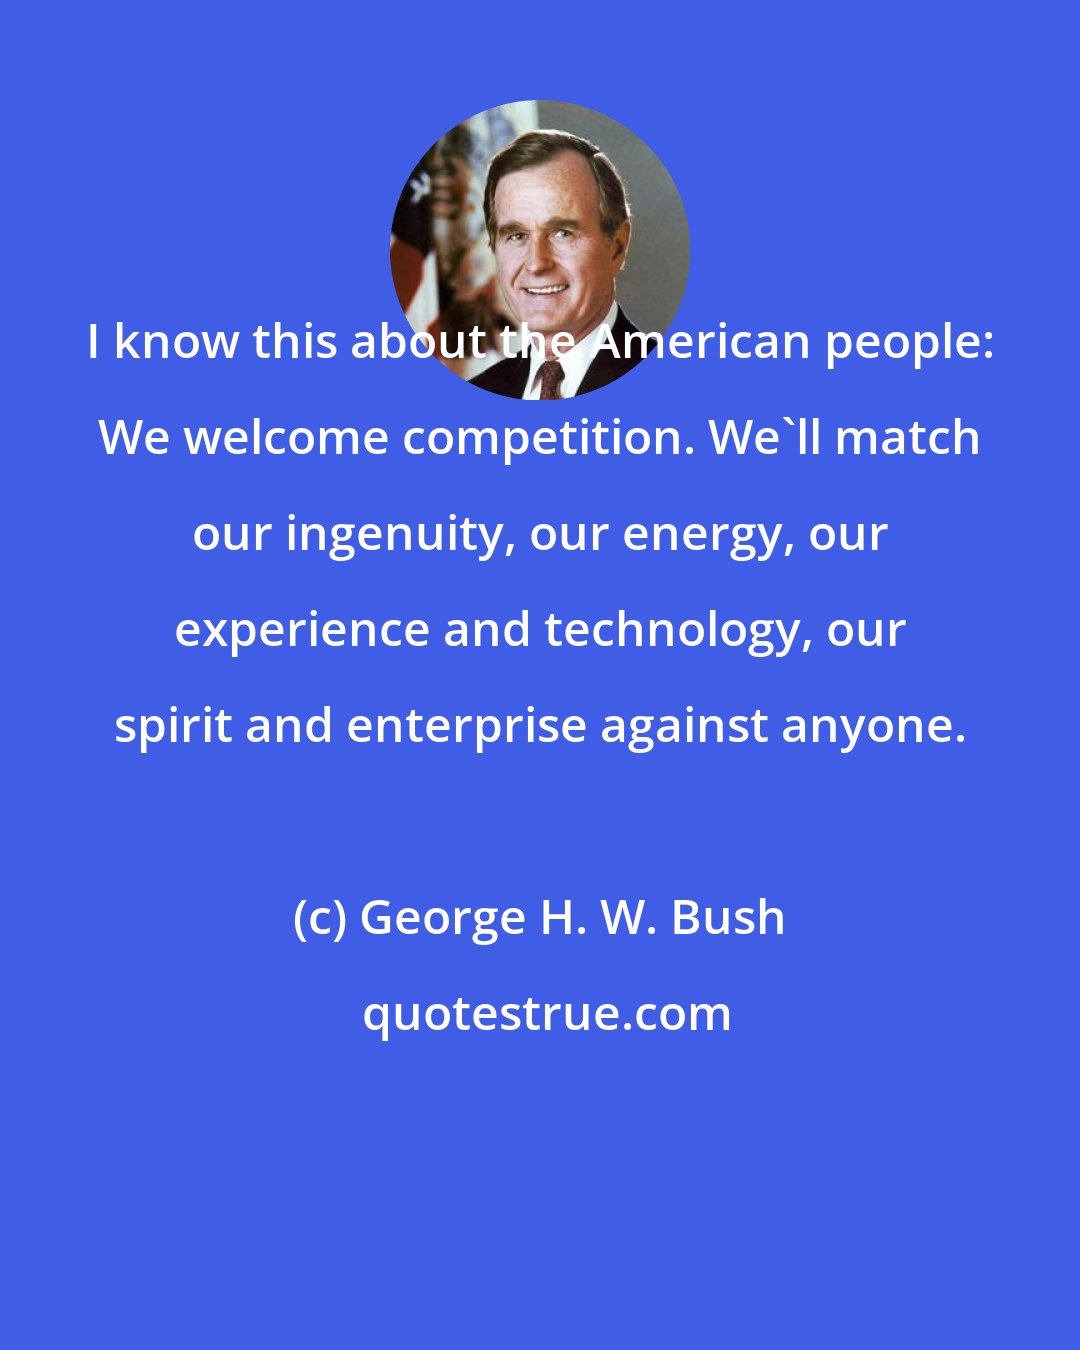 George H. W. Bush: I know this about the American people: We welcome competition. We'll match our ingenuity, our energy, our experience and technology, our spirit and enterprise against anyone.